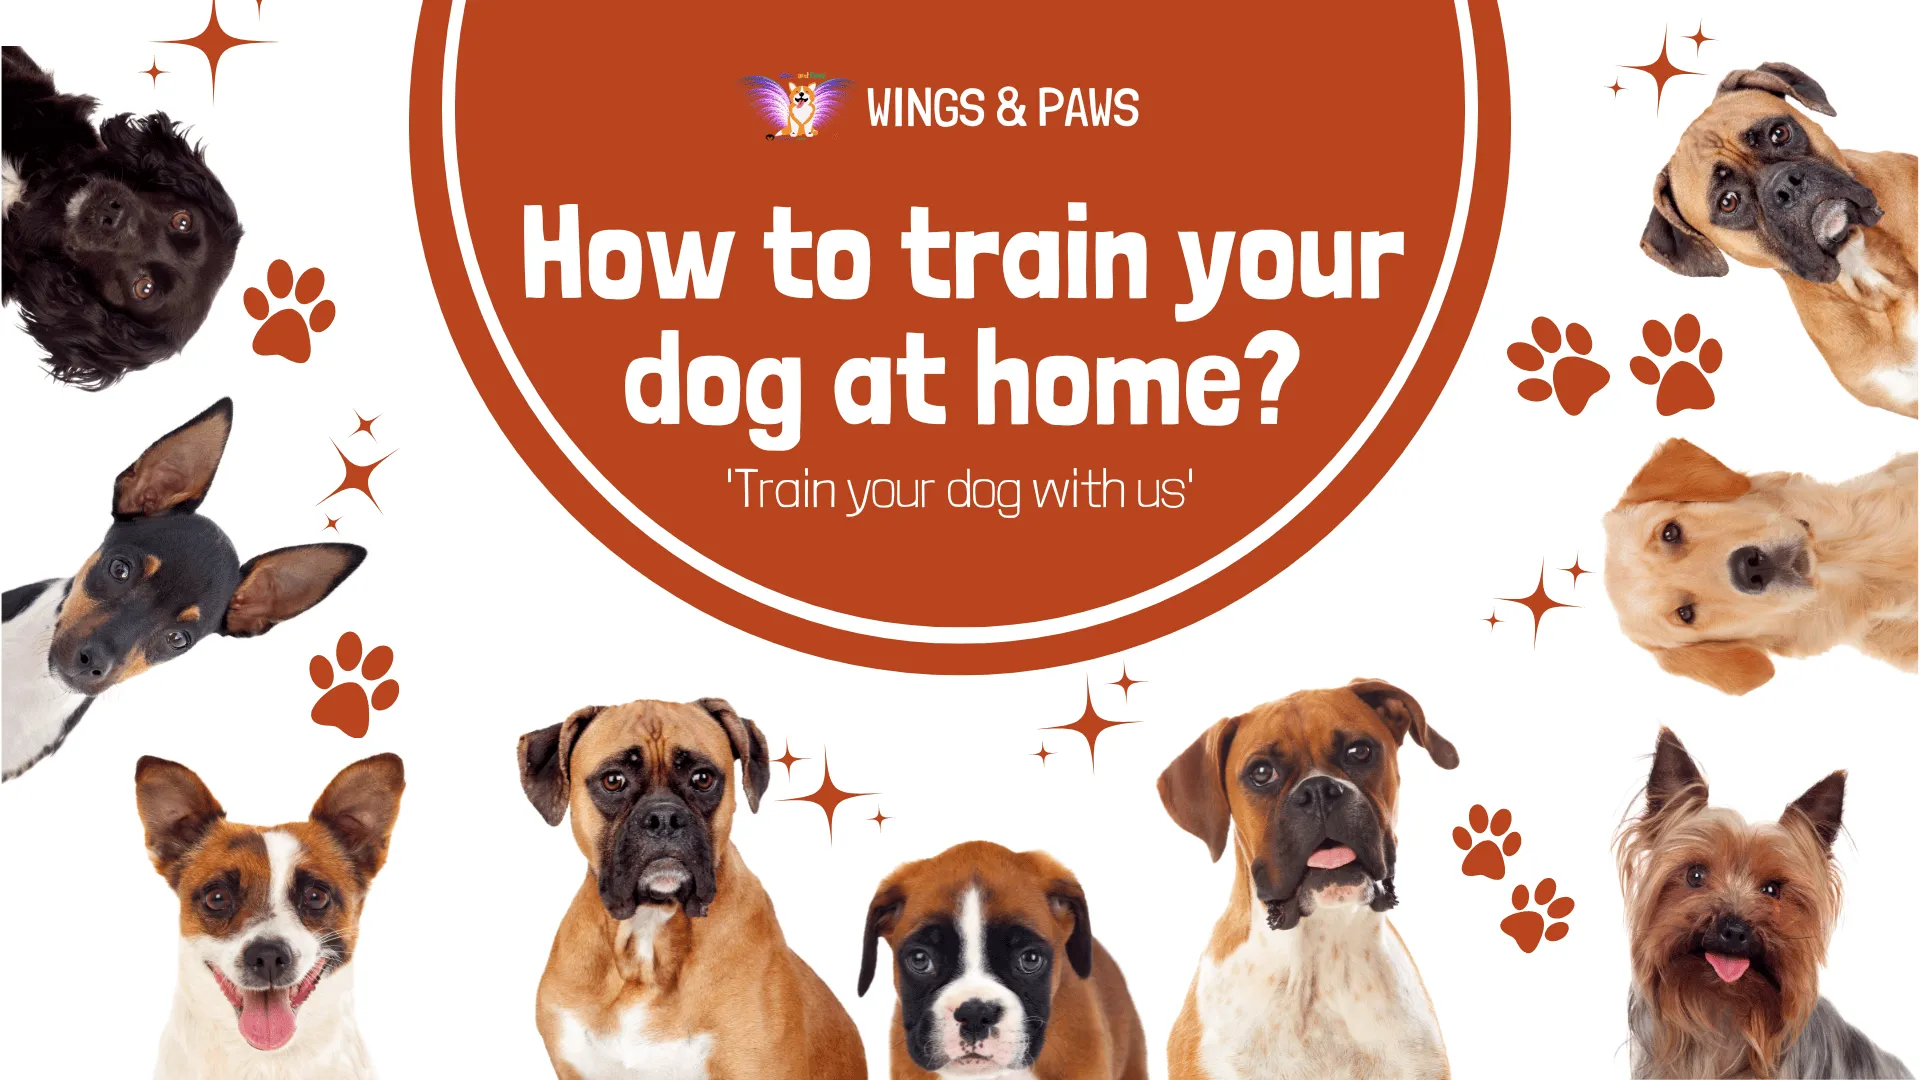 How to train your dog at home?